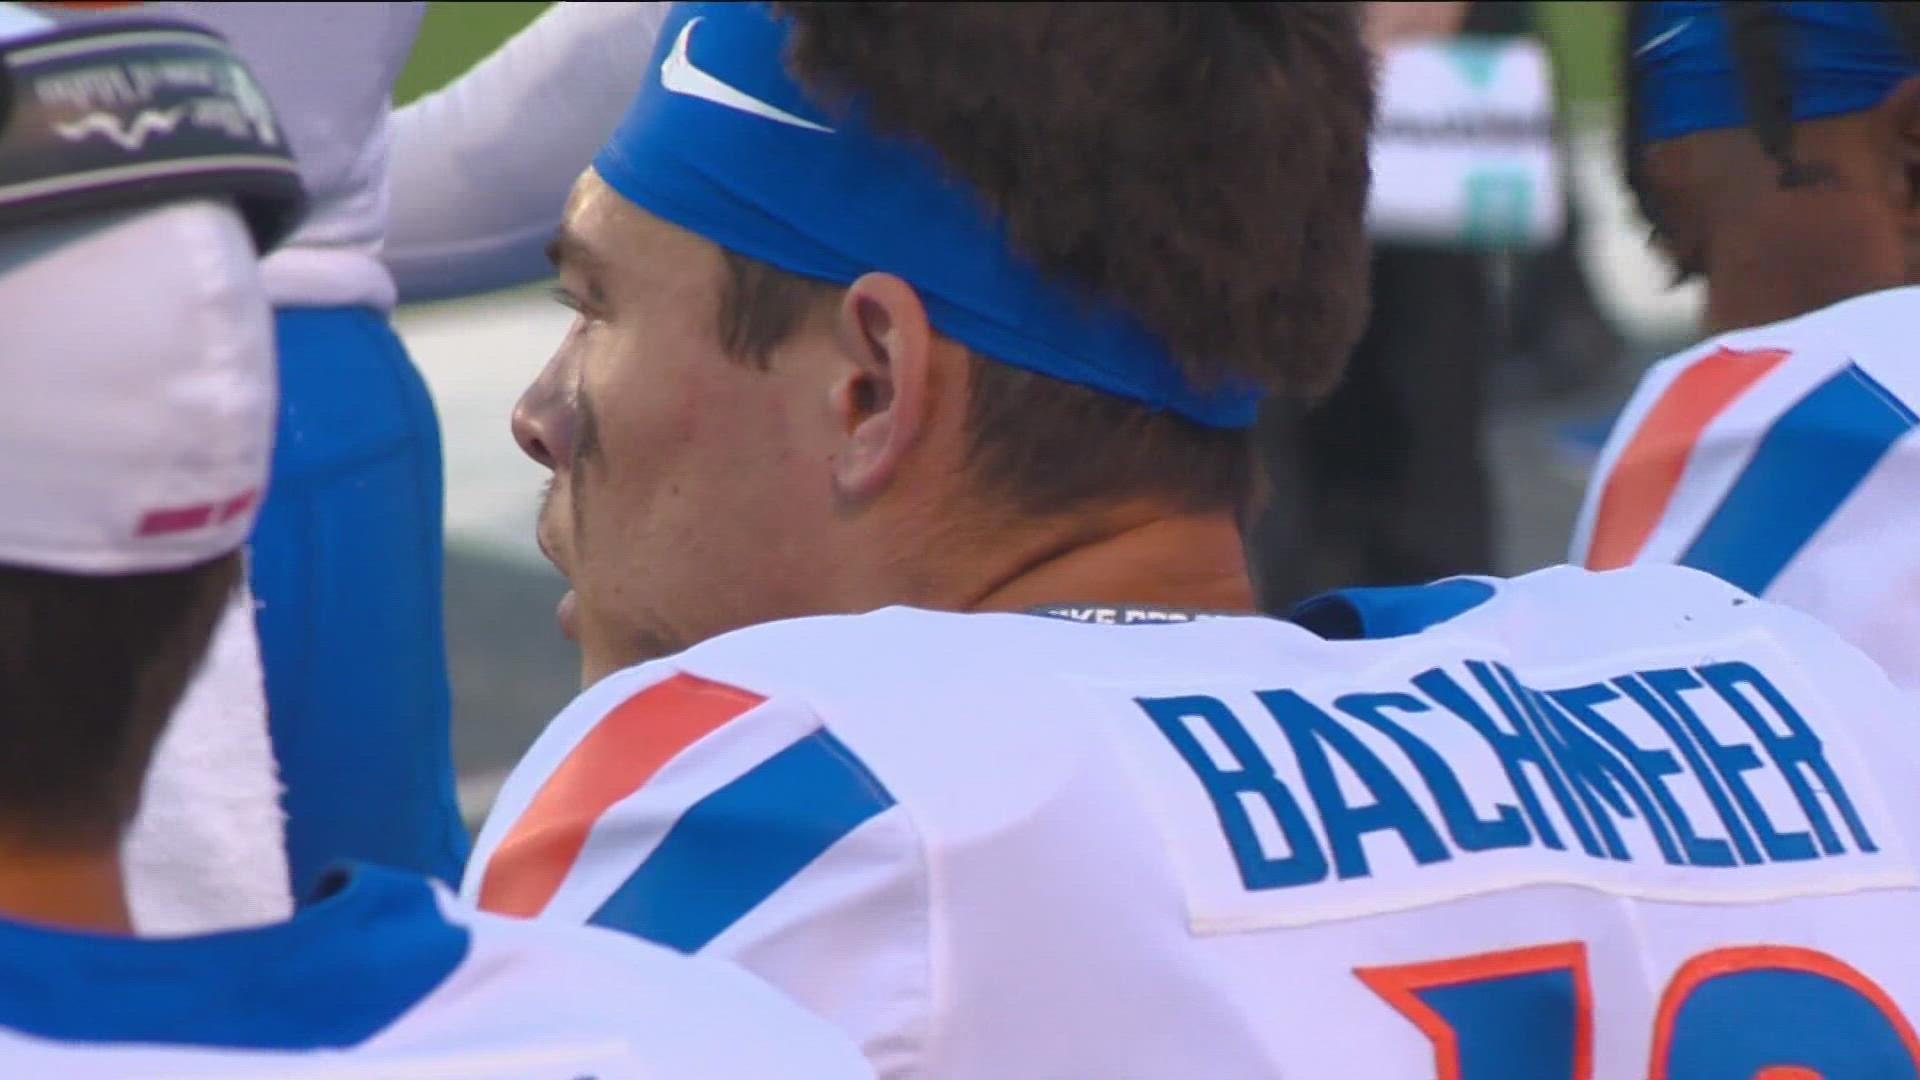 Former Boise State quarterback and four-year starter Hank Bachmeier is transferring to Louisiana Tech, KTVB Sports Director Jay Tust confirmed Wednesday.